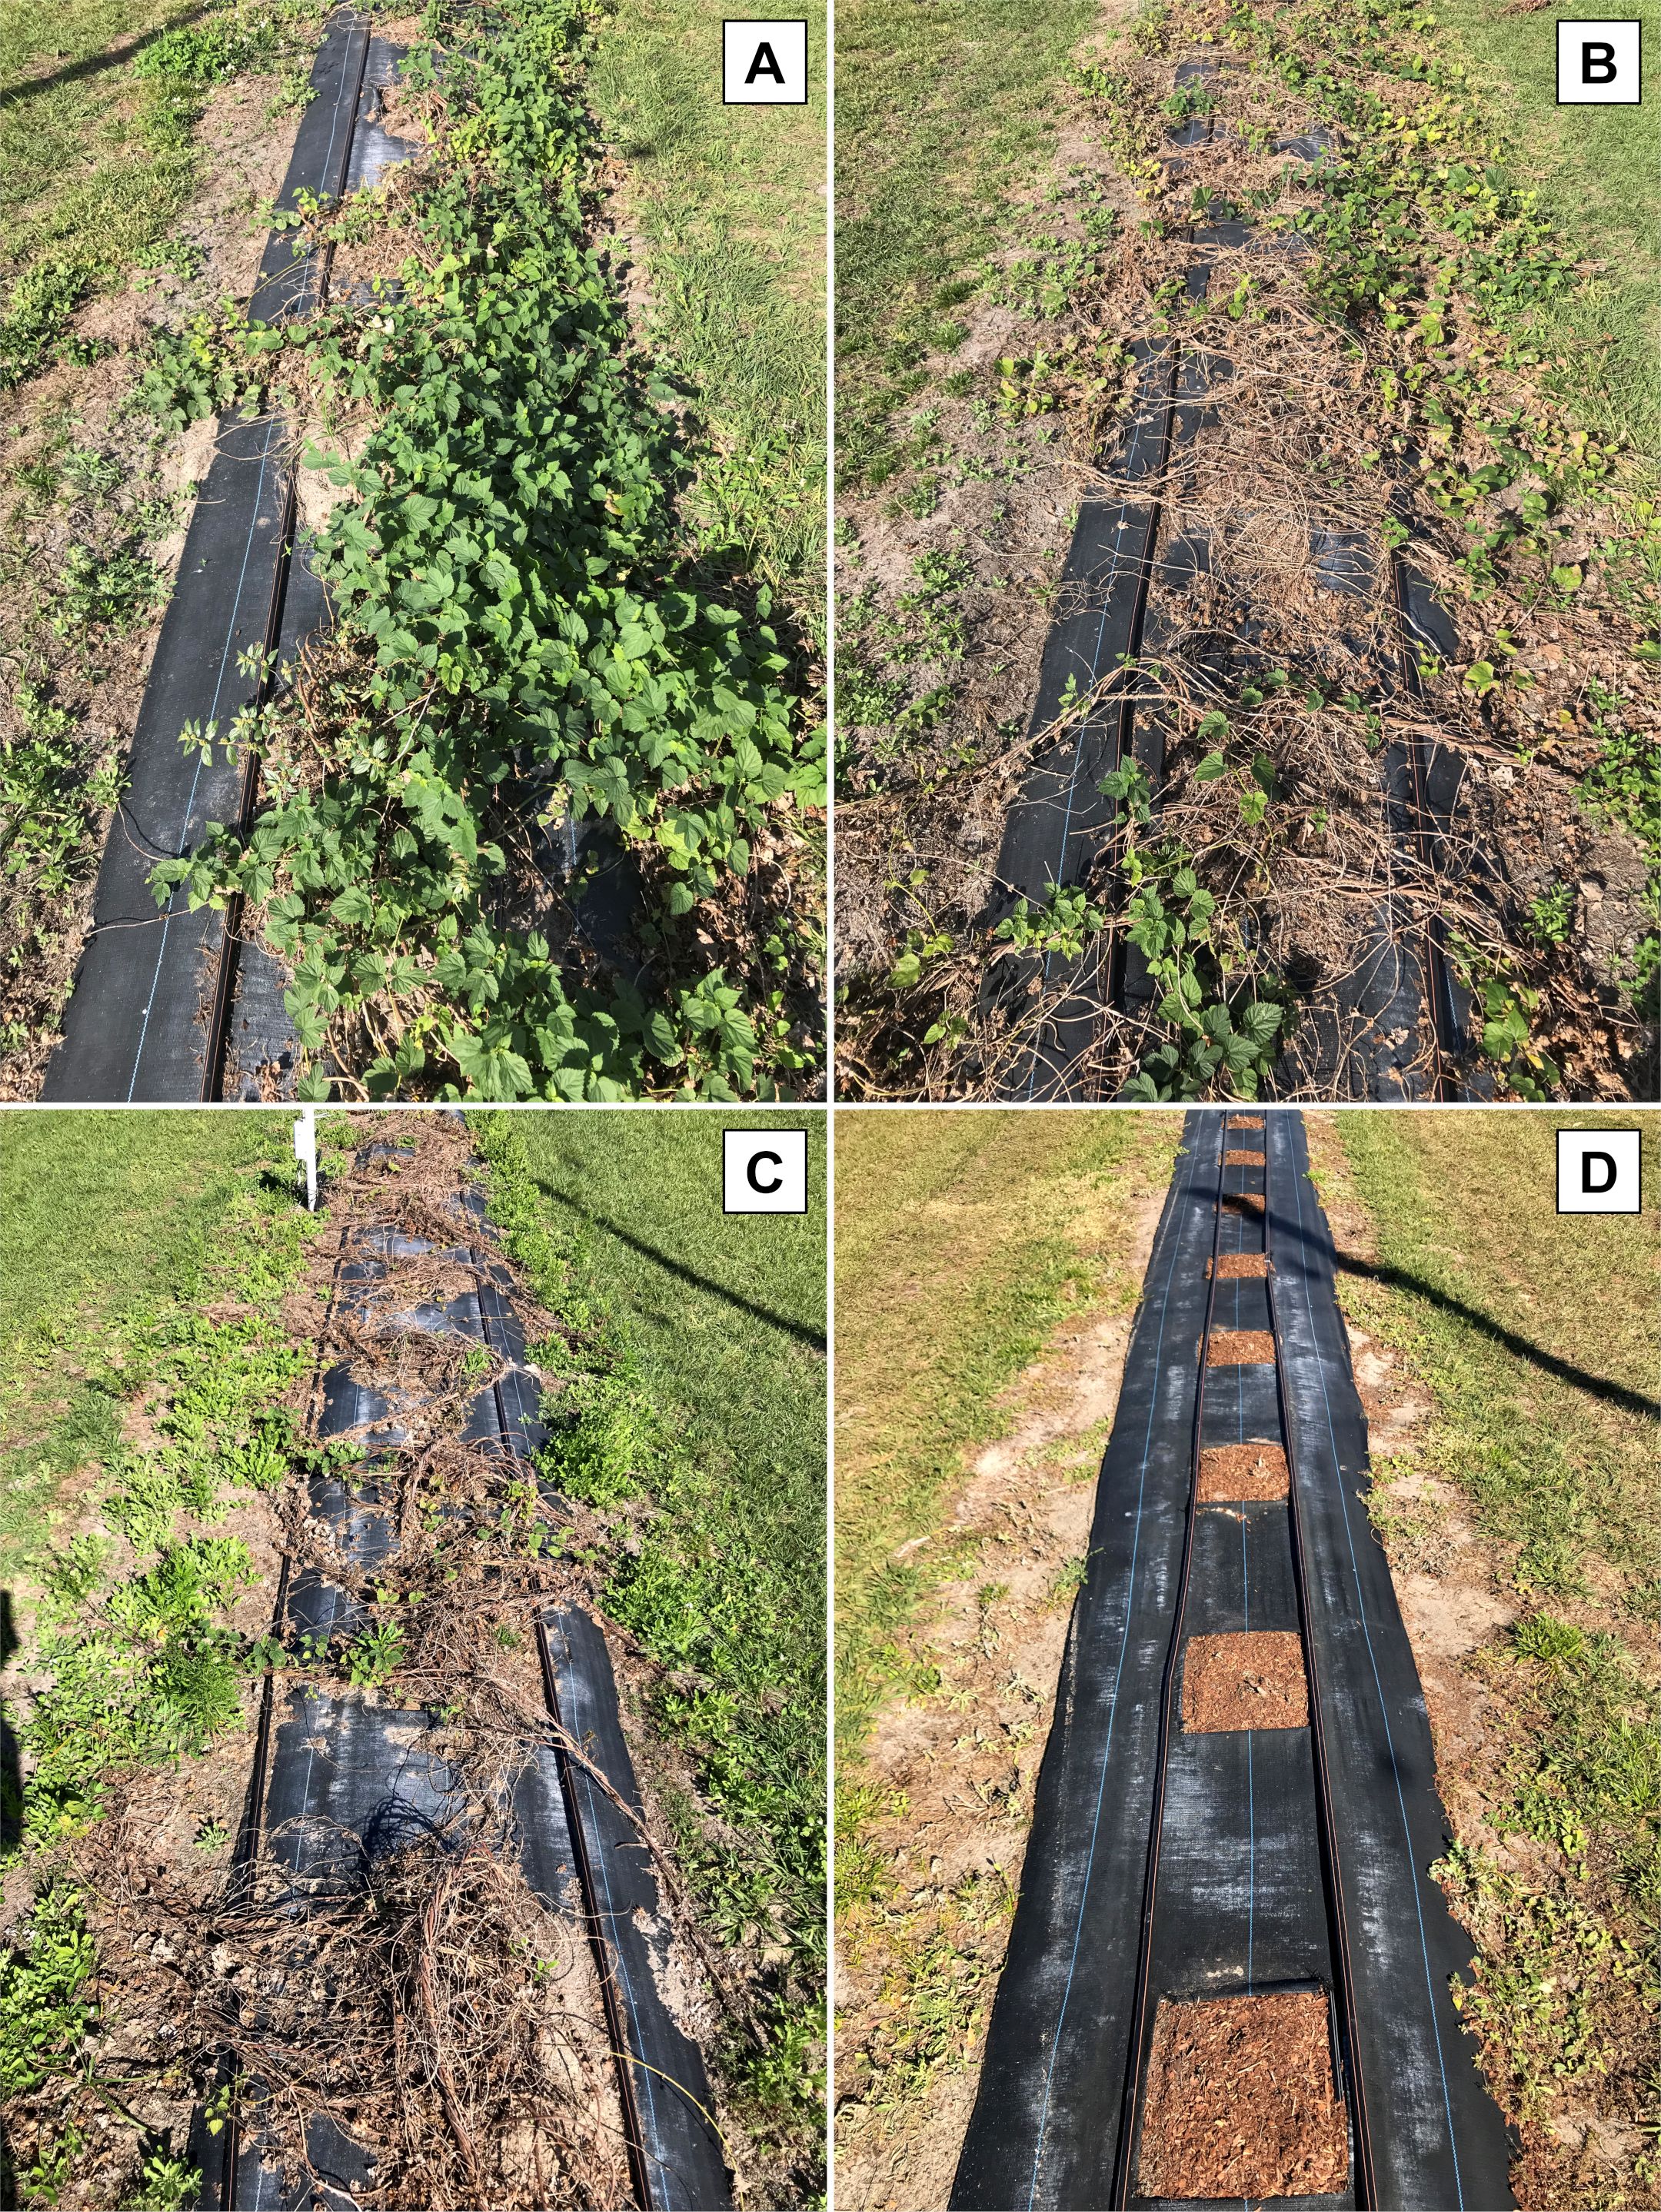 Senescence of 'Cascade' bines in the UF/IFAS GCREC hopyard after the fall harvest: A) unsenesced bines with green leaves (late November), B) senescing bines (late December), C) fully senescent bines (mid-January), and D) cleaned hills after pruning (early February). 